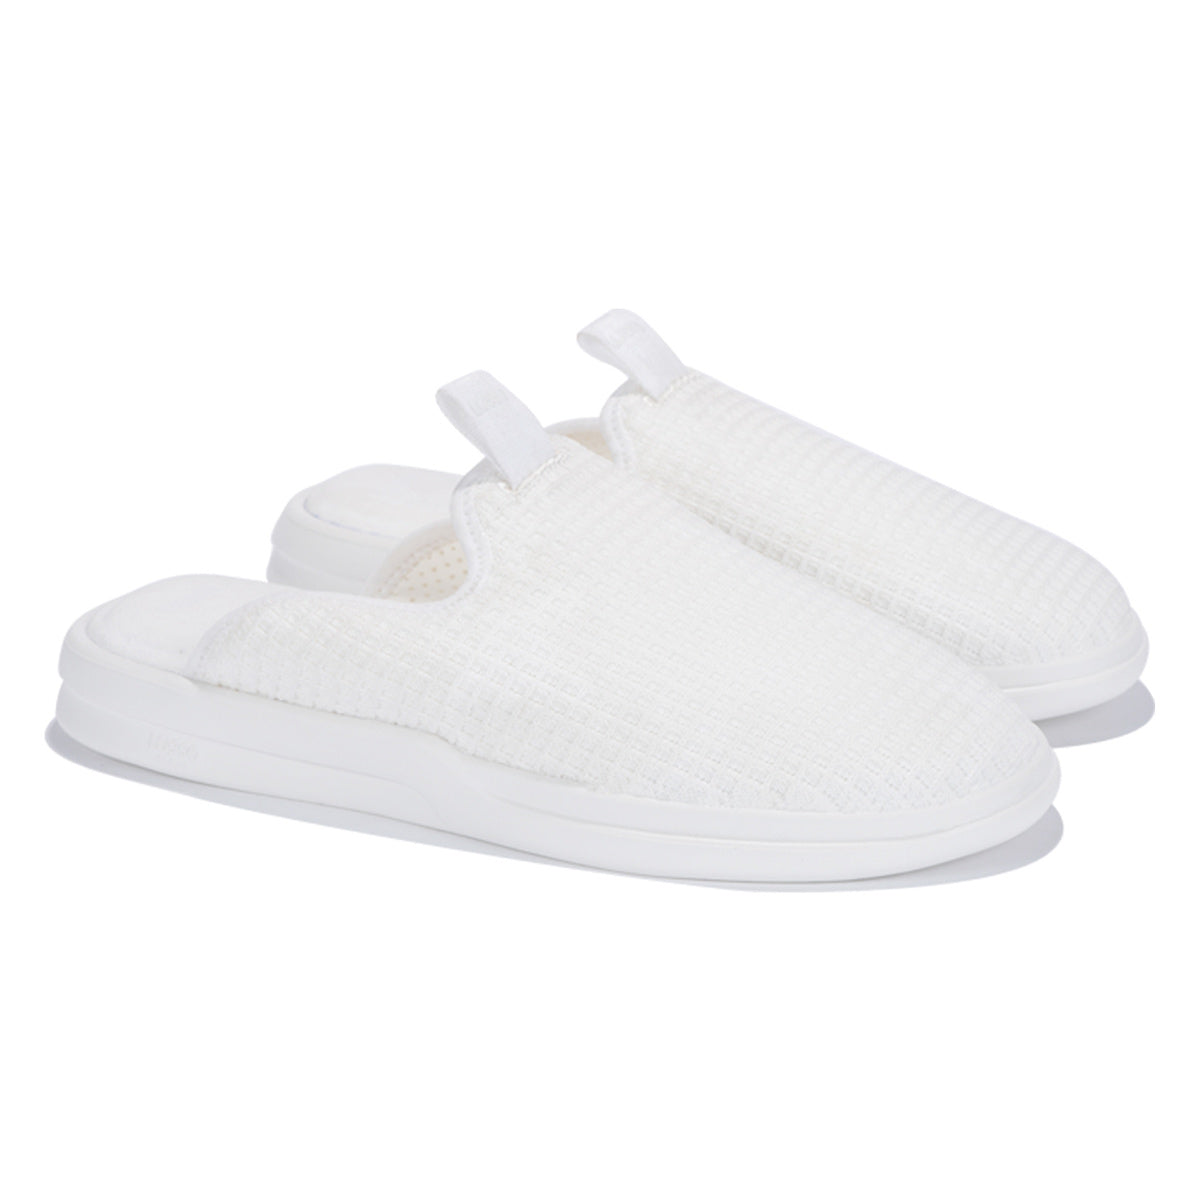 Lusso Cloud Pelli Waffle - Bright White/Lily